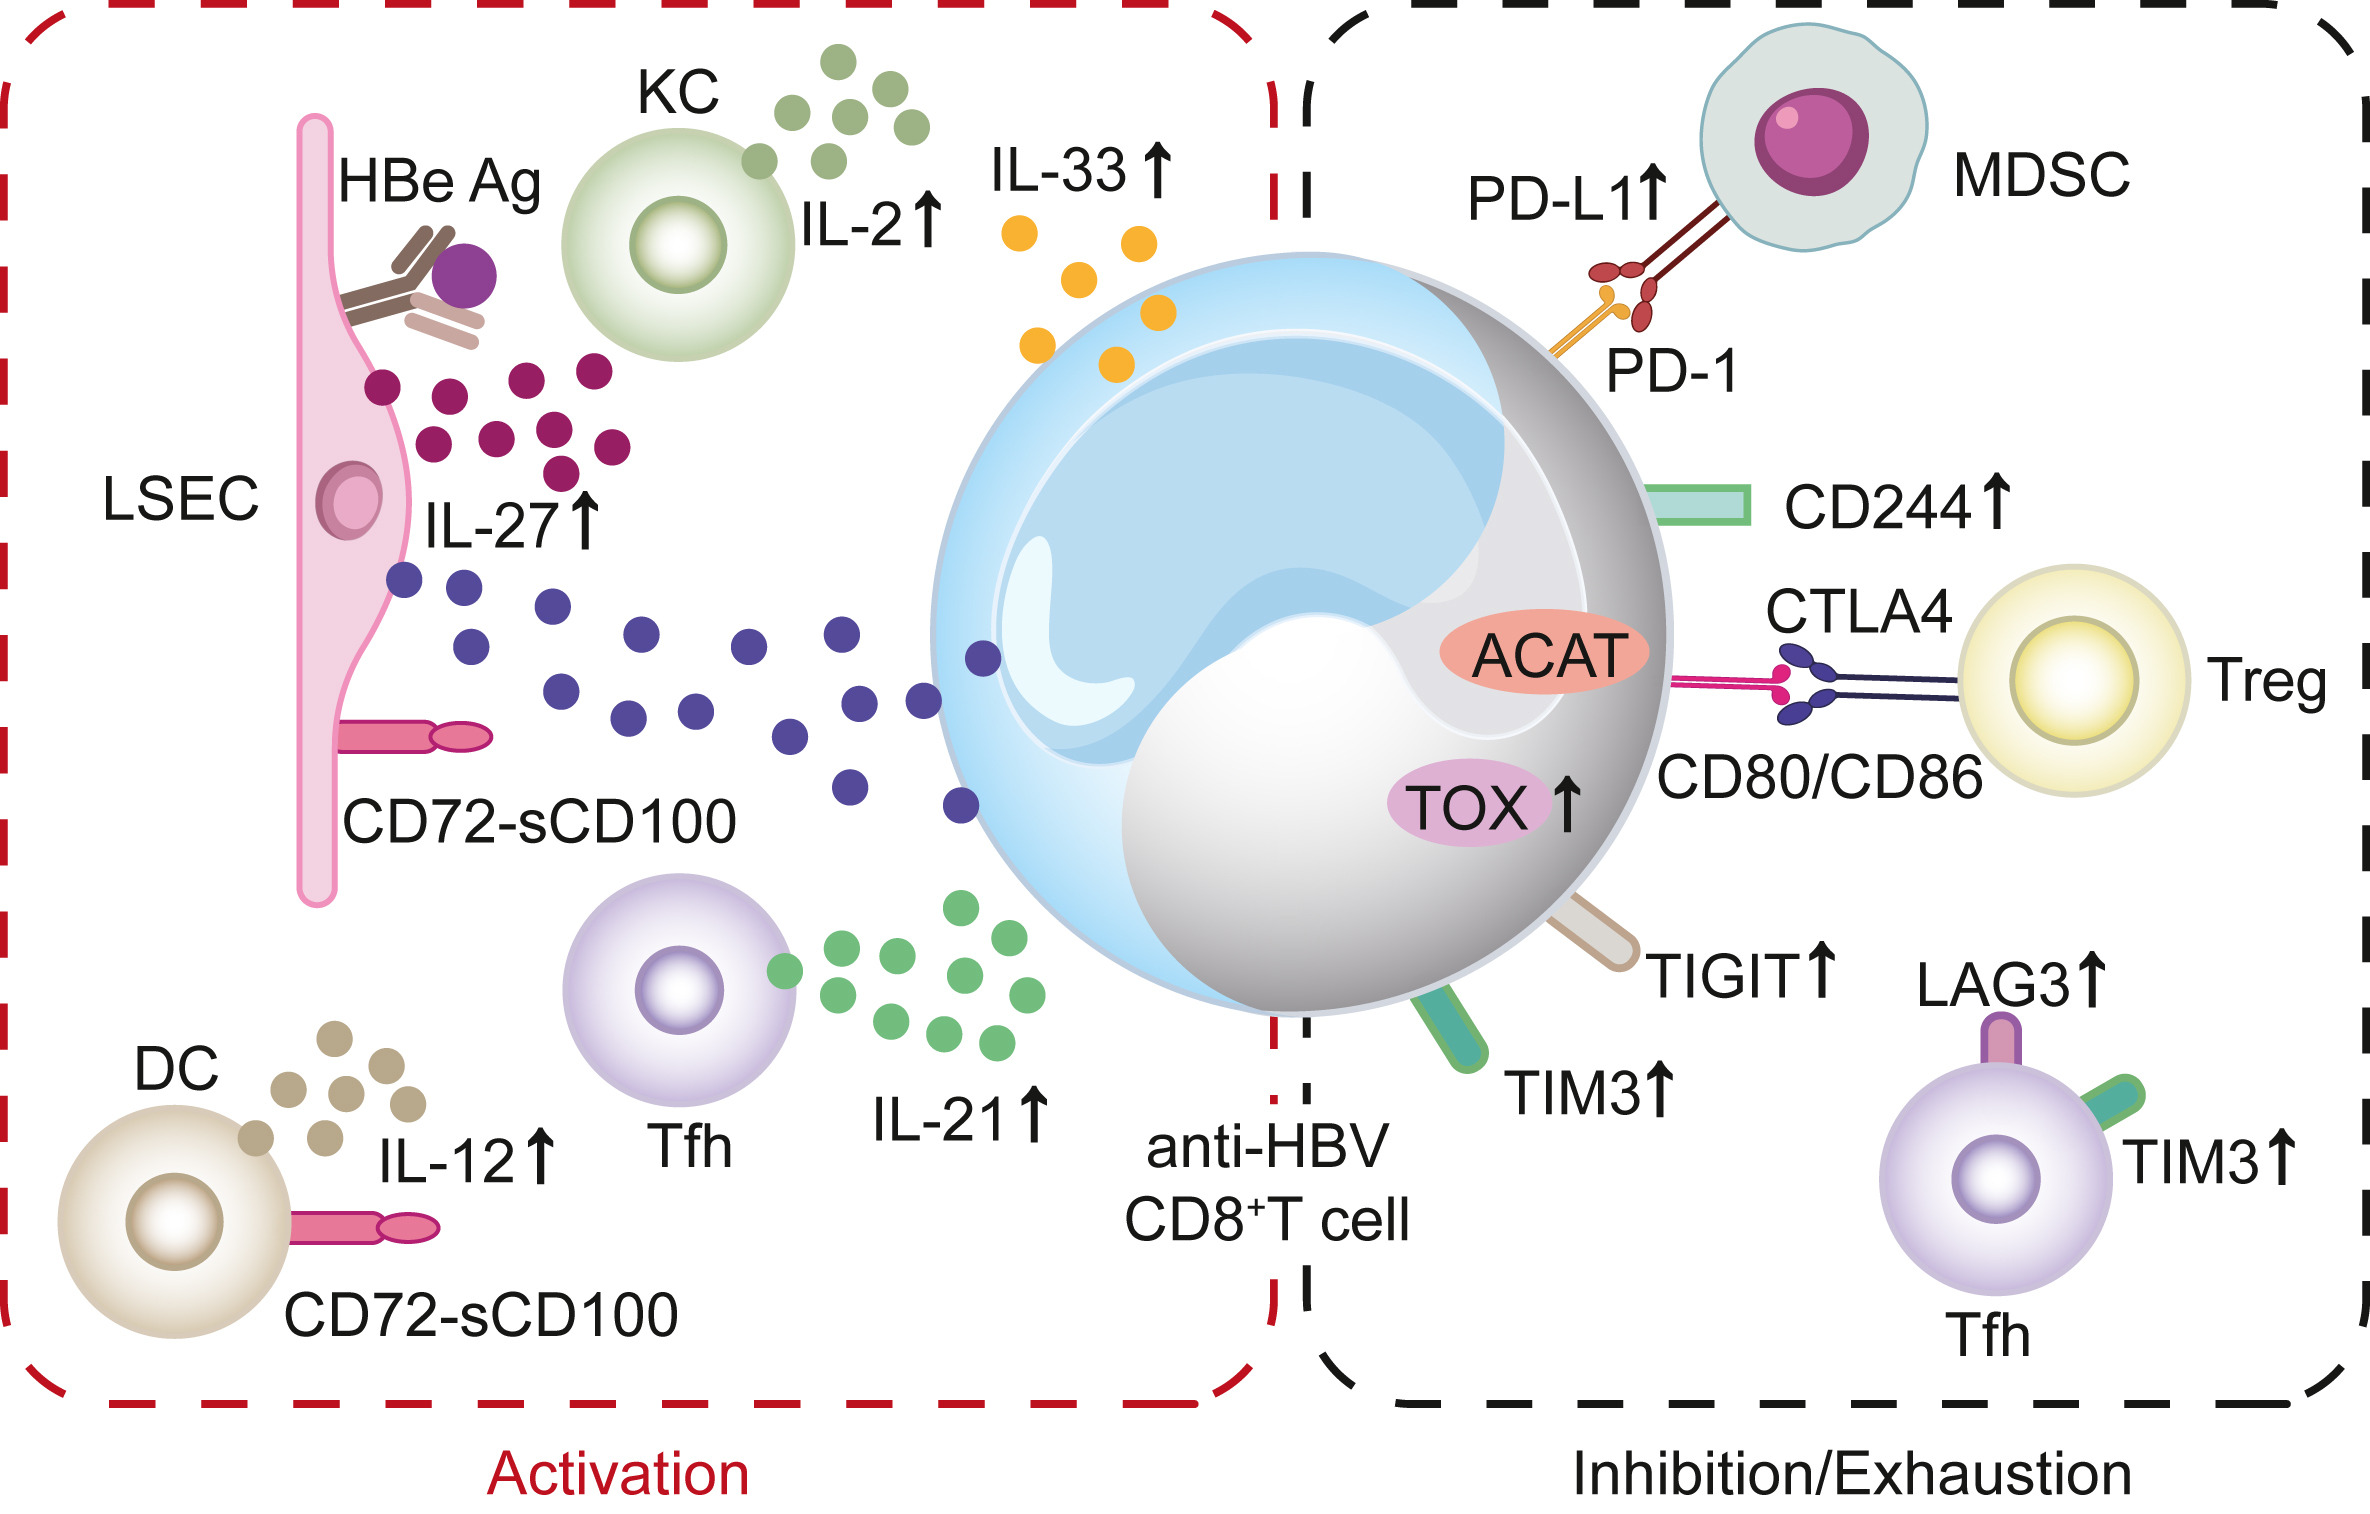 Recent advances in understanding T cell activation and exhaustion during HBV infection